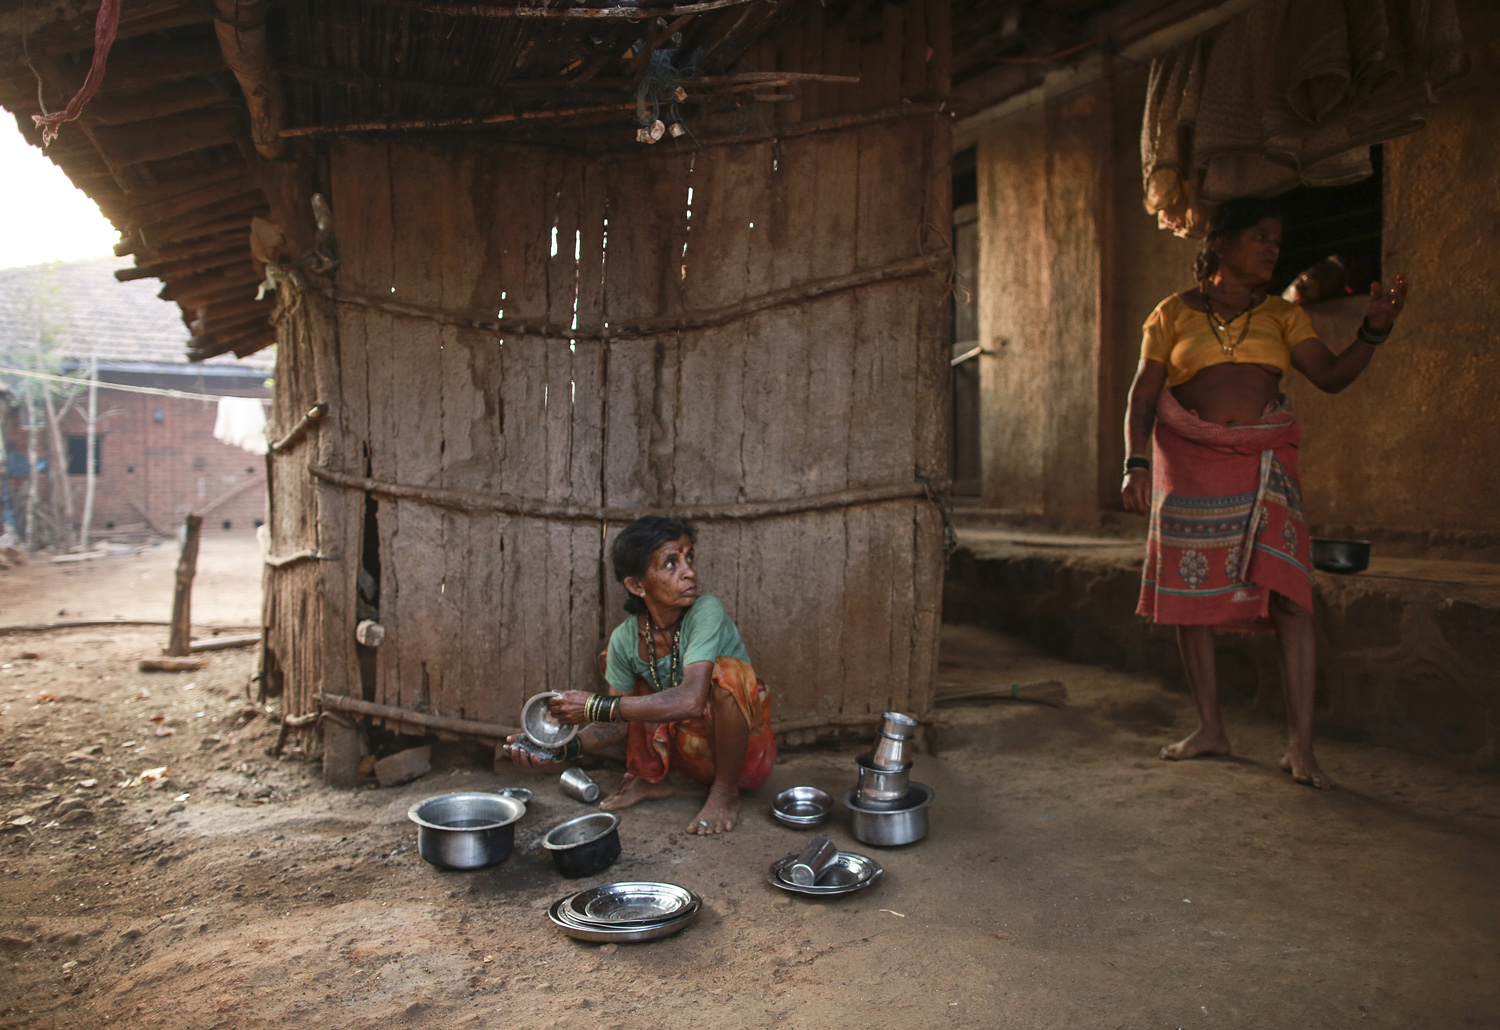  Sakhri (L), the second wife of Sakharam Bhagat, listens to Tuki, the first wife of Sakharam Bhagat as she washes utensils outside their house in Denganmal village. 